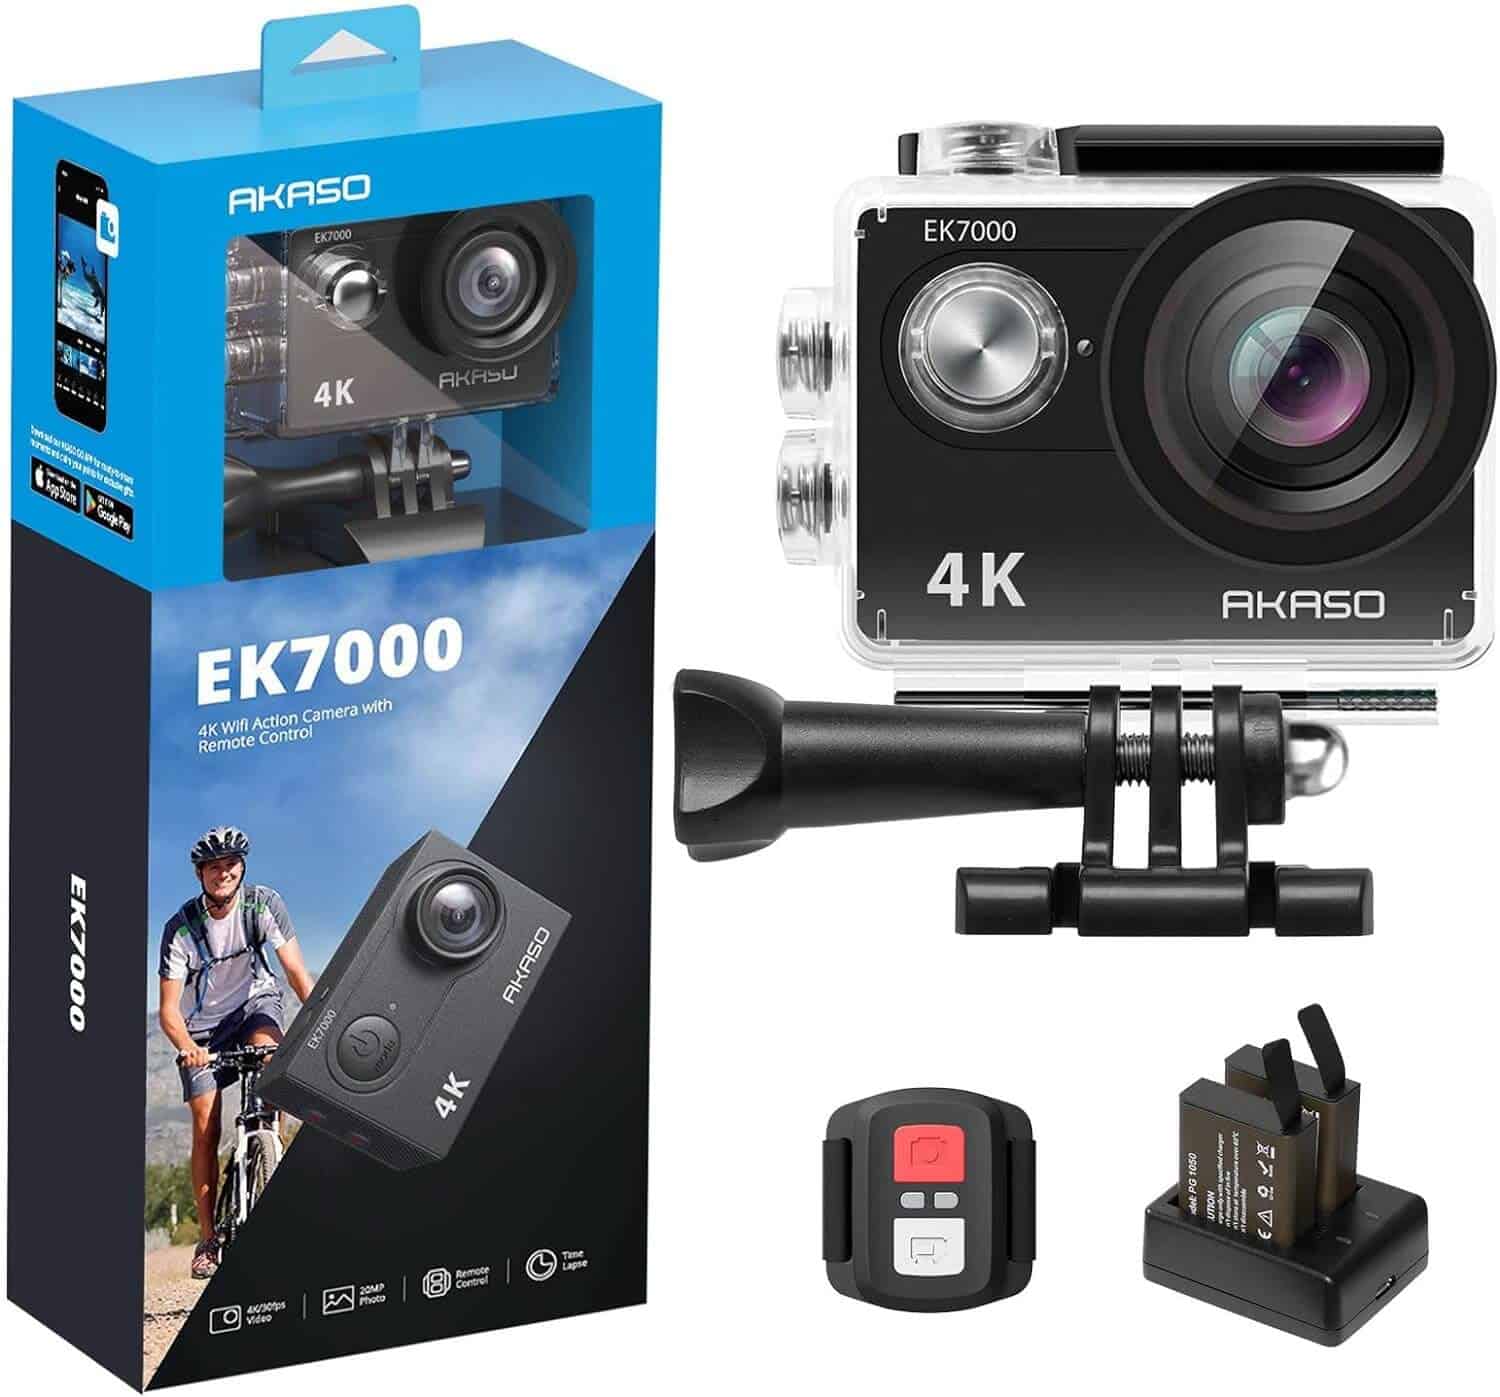 Best action camera on a budget, perfect for teens and beginners